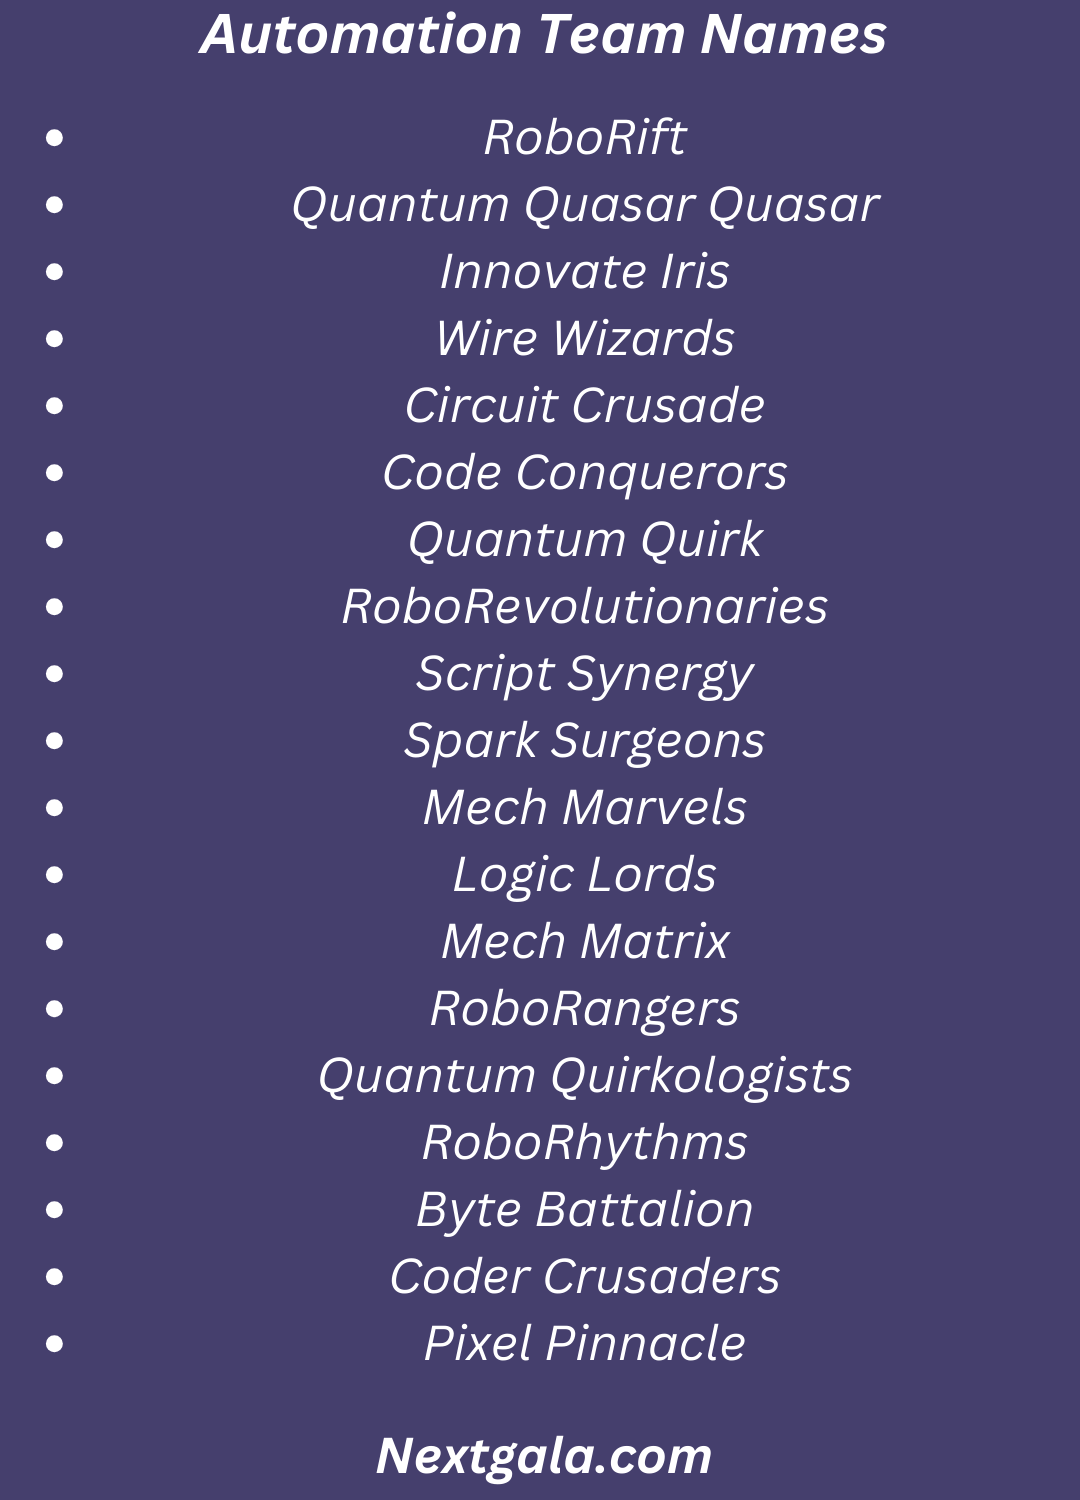 Automation Team Names (1)